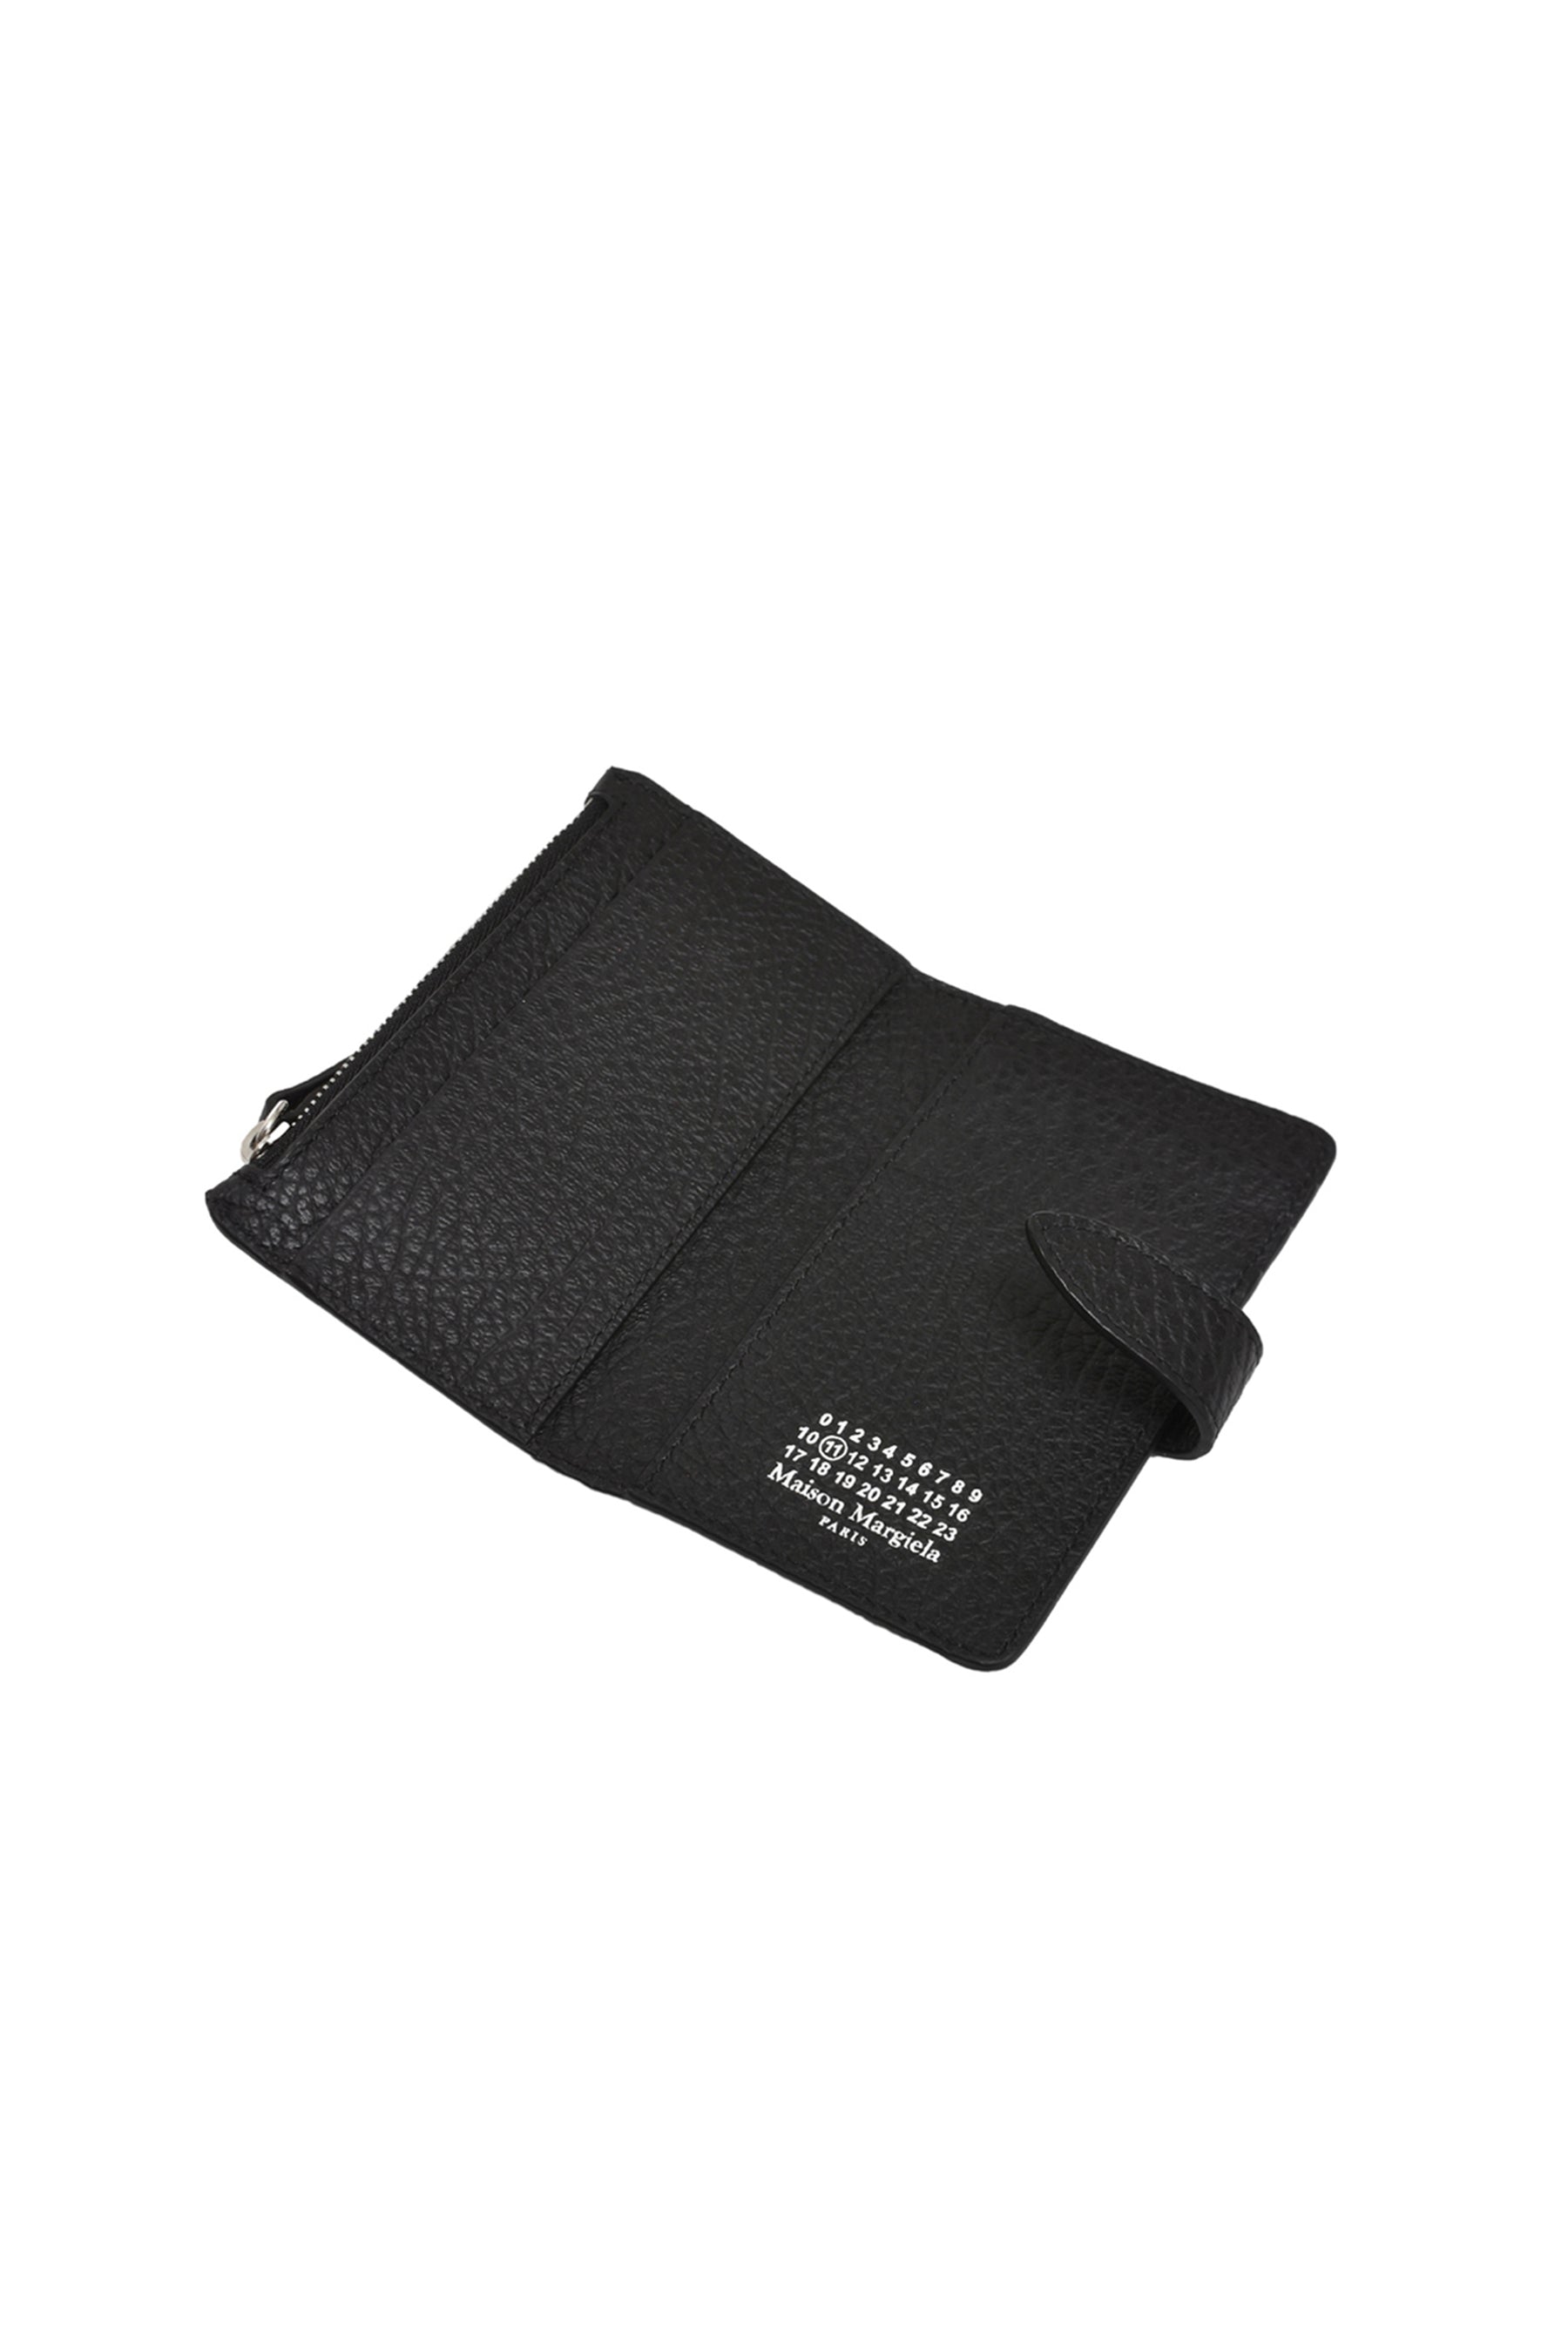 CARD HOLDER CLIP 2 WITH ZIP / BLK